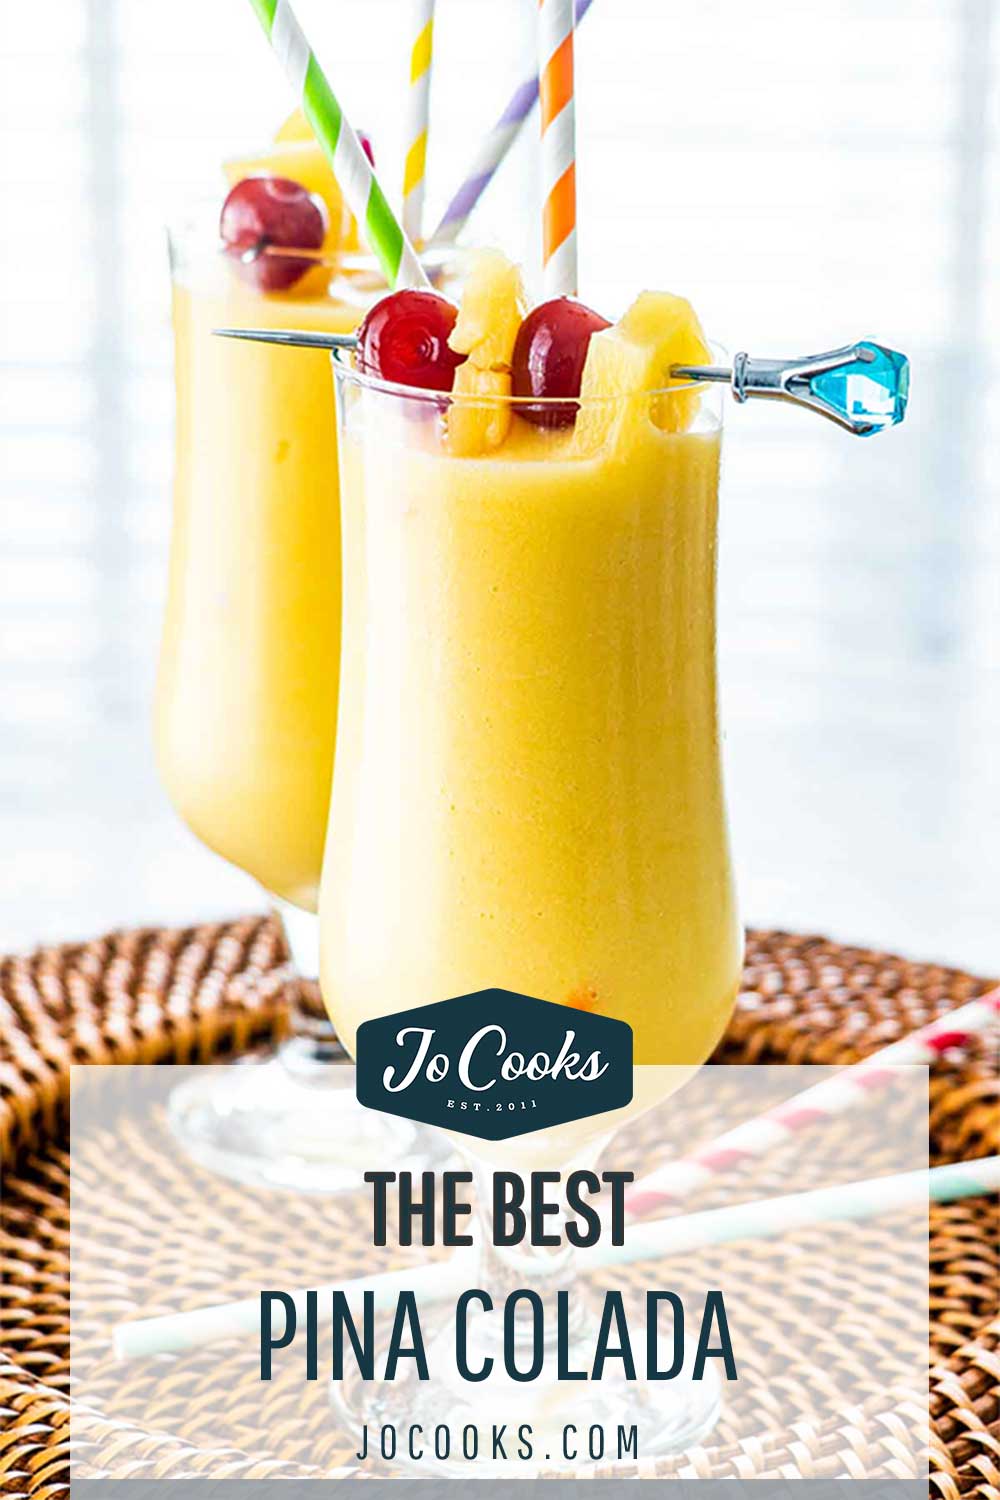 two glasses with Piña Colada and garnished with maraschino cherries and pineapple wedges